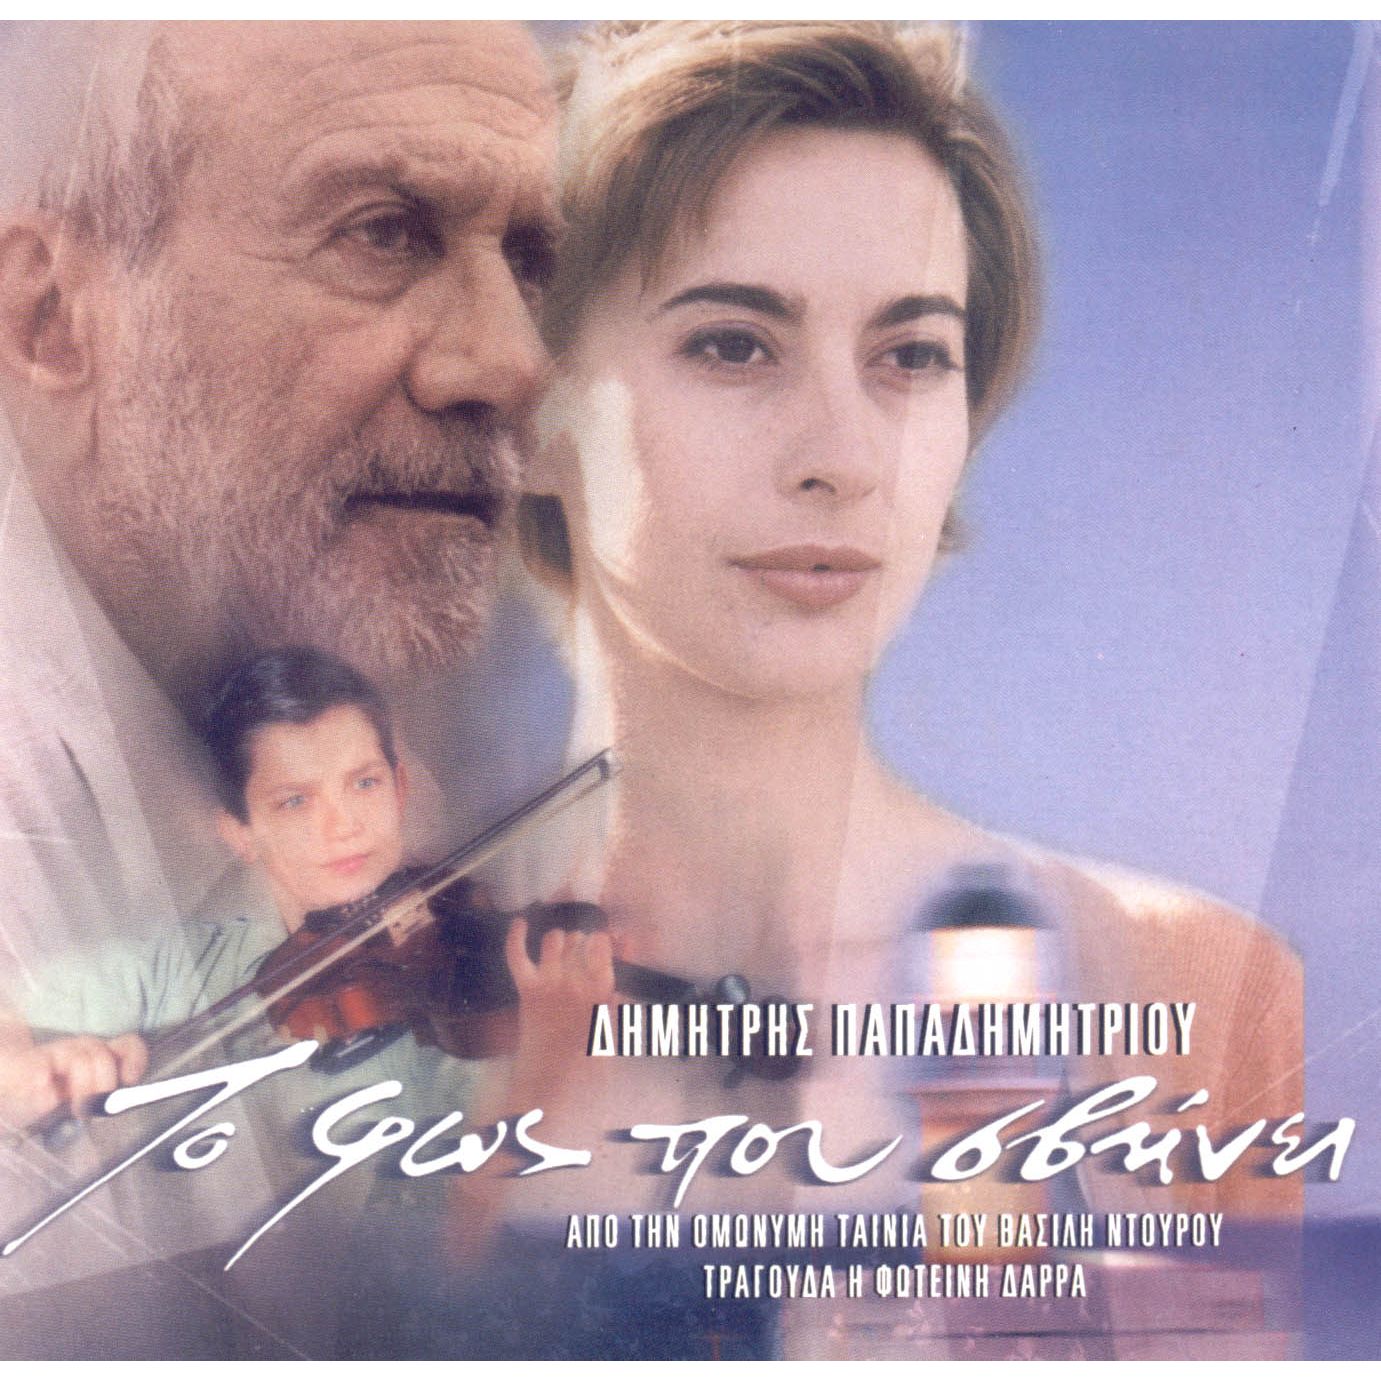 You are currently viewing Το φως που σβήνει (2000)